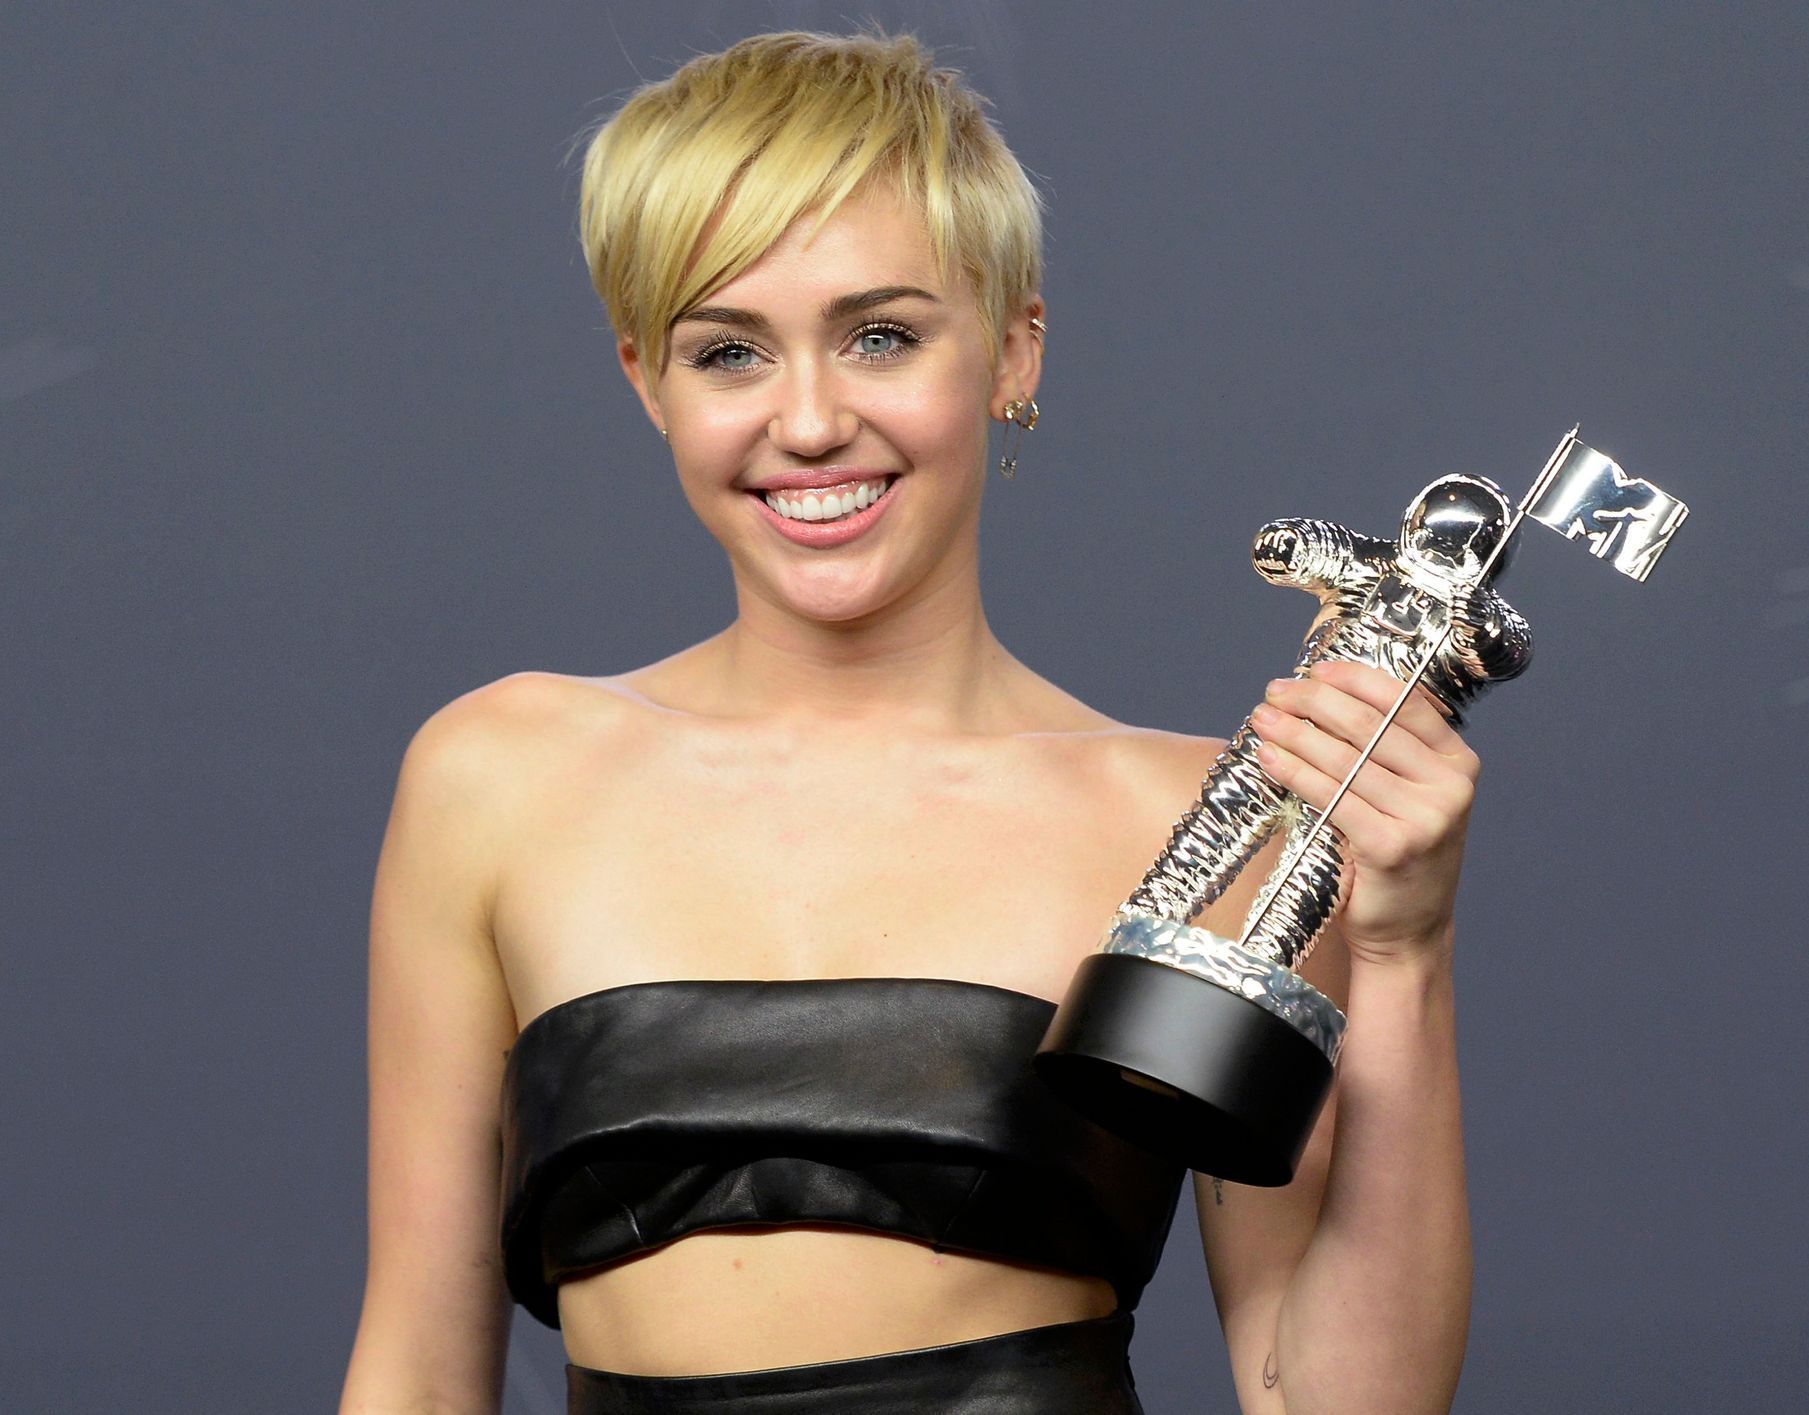 Singer Miley Cyrus Poses Backstage After Winning Video Of The Year For Wrecking Ball During